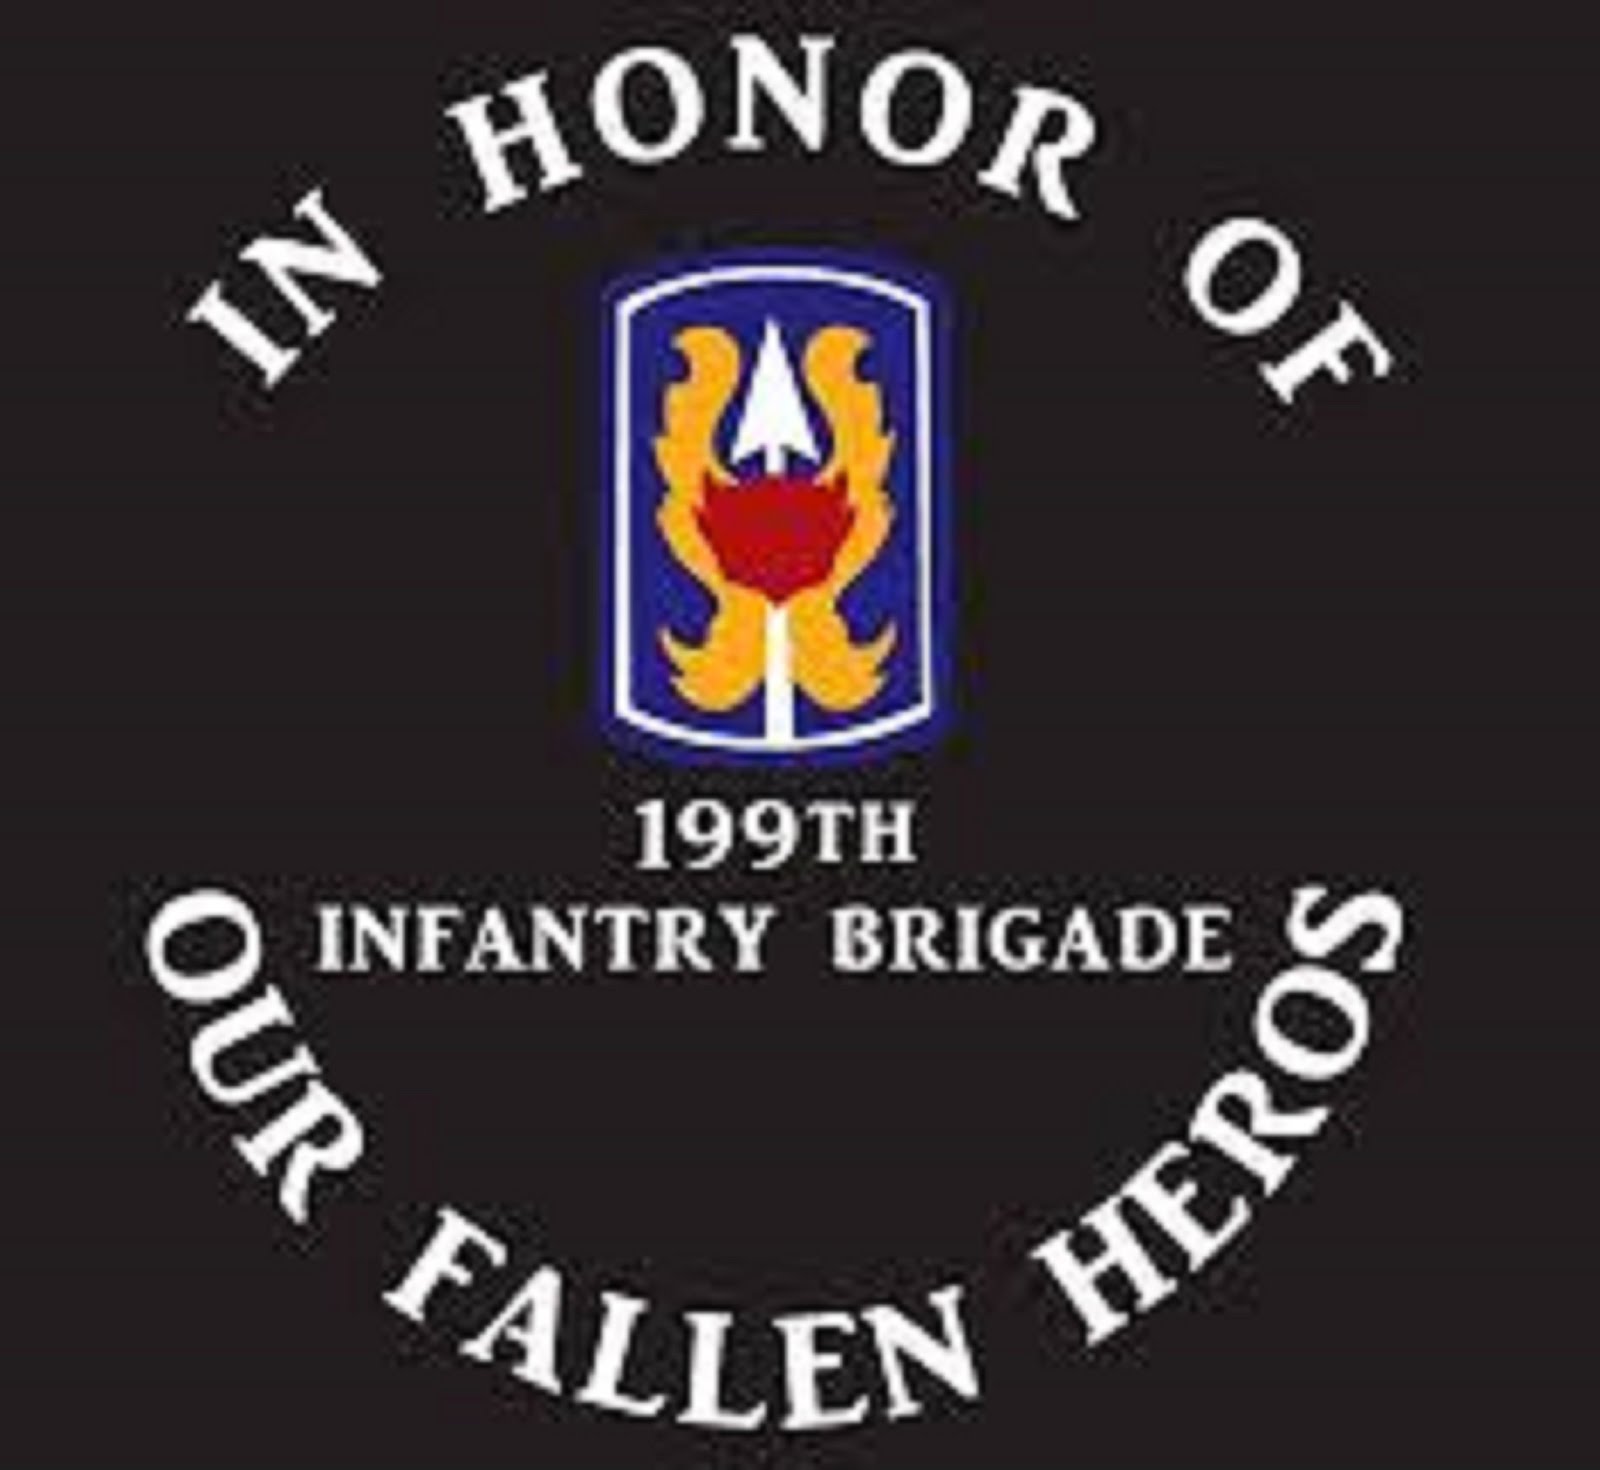 IN HONOR OF 199th INFANTRY BRIGADE - OUR FALLEN HEROS